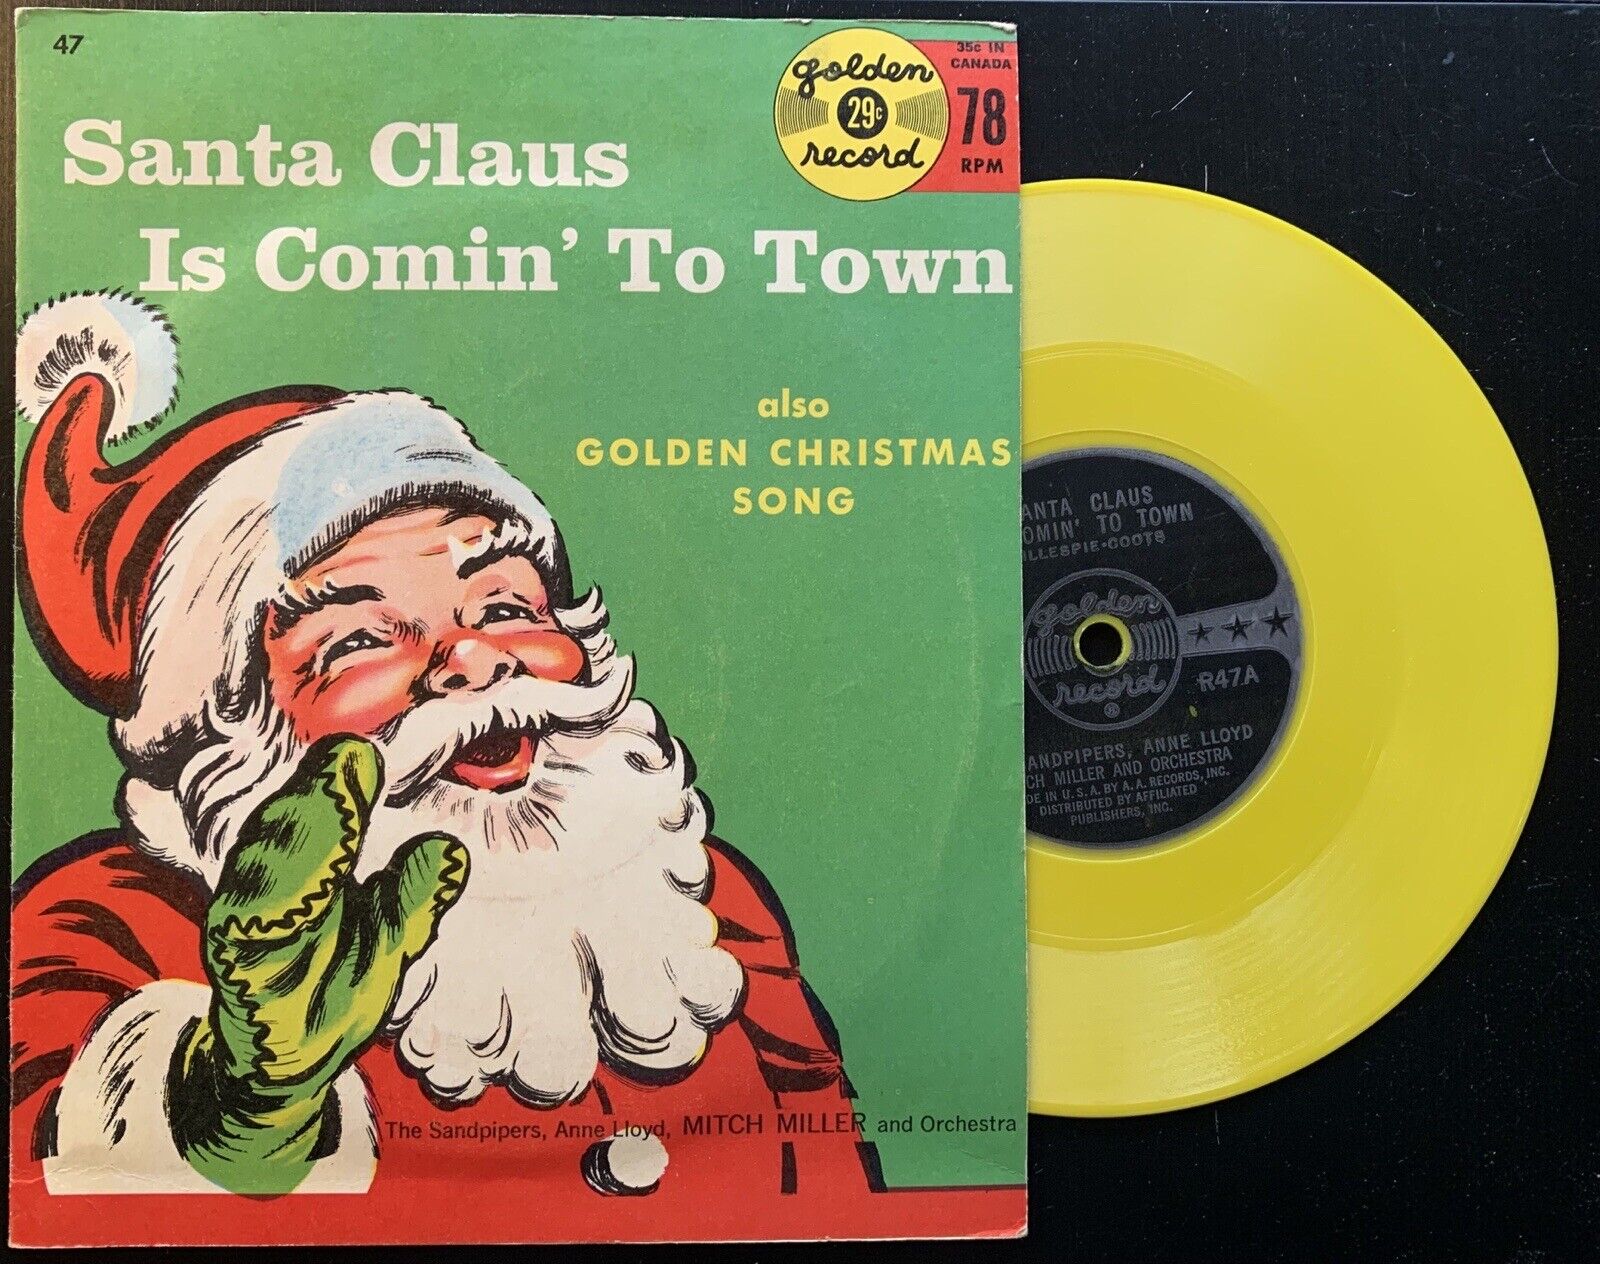 RARE Vintage Santa Claus is Coming to Town Mitch Miller 78 RPM R47 Golden Record